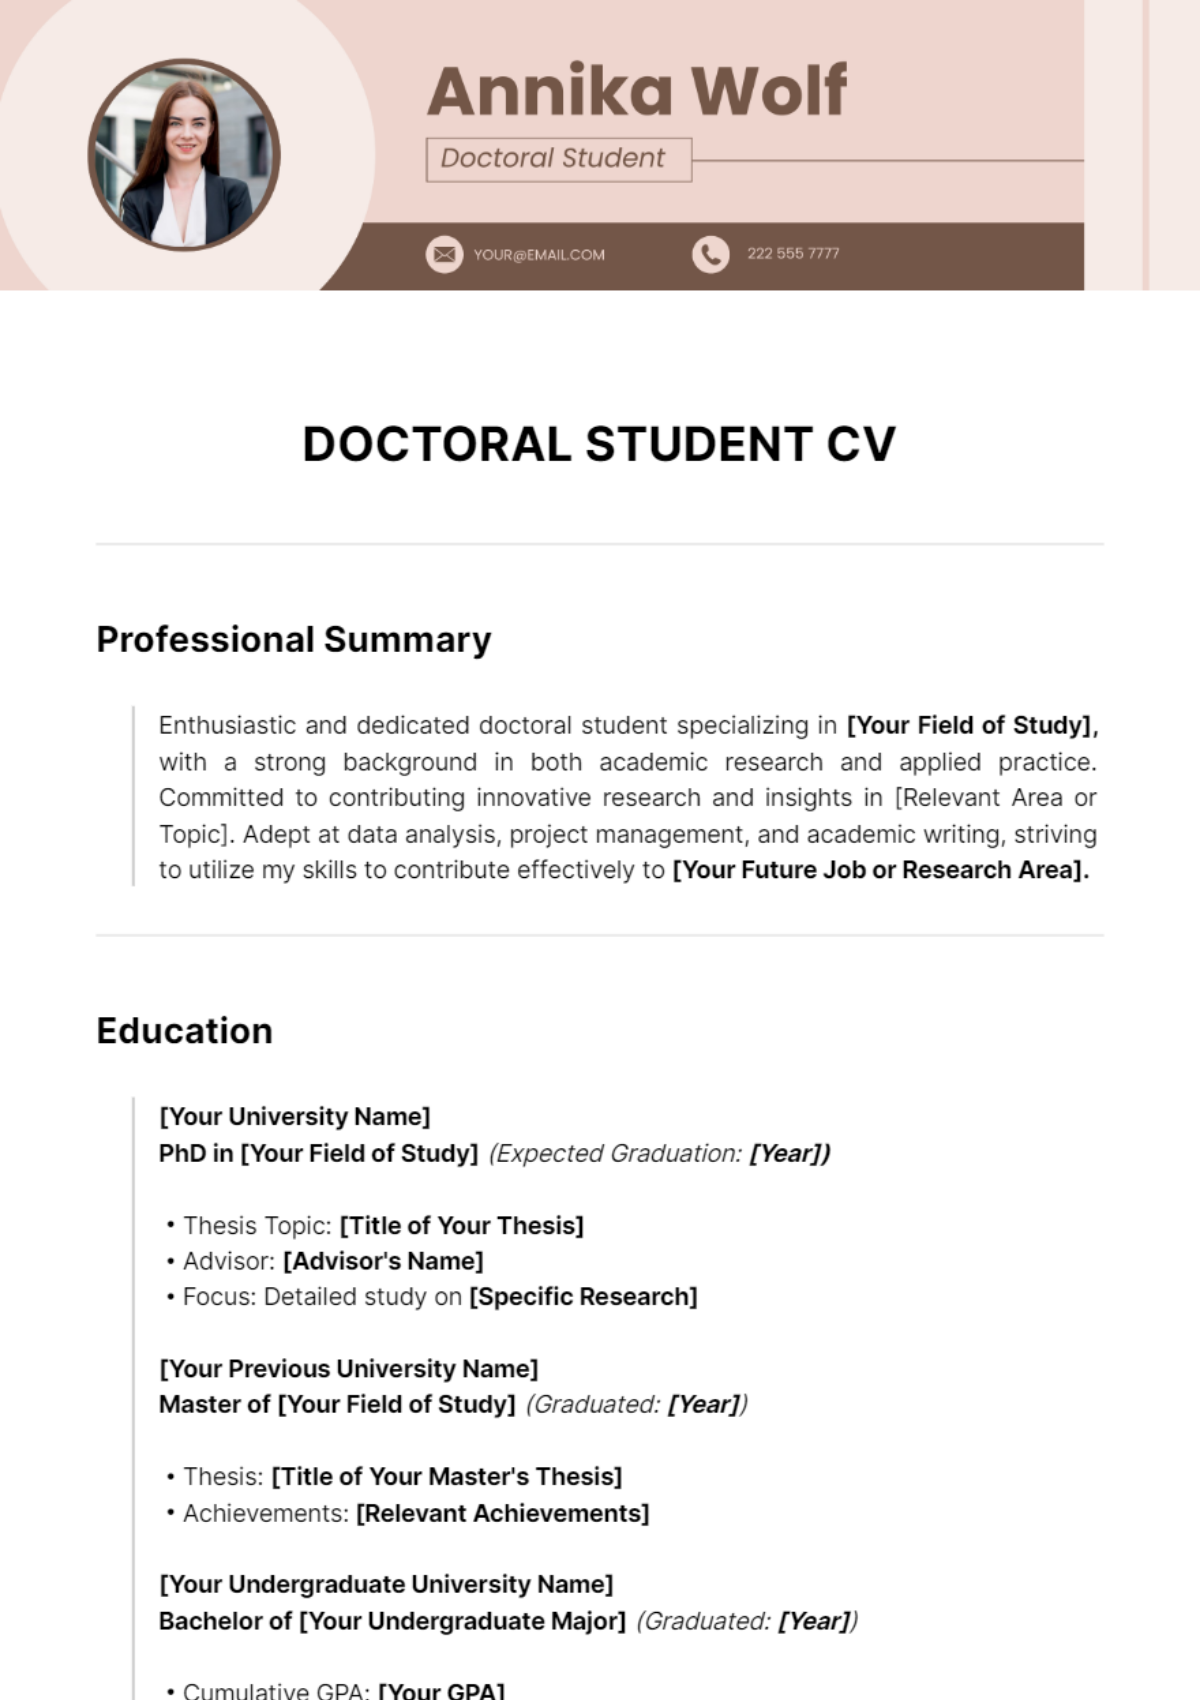 Doctoral Student CV Template